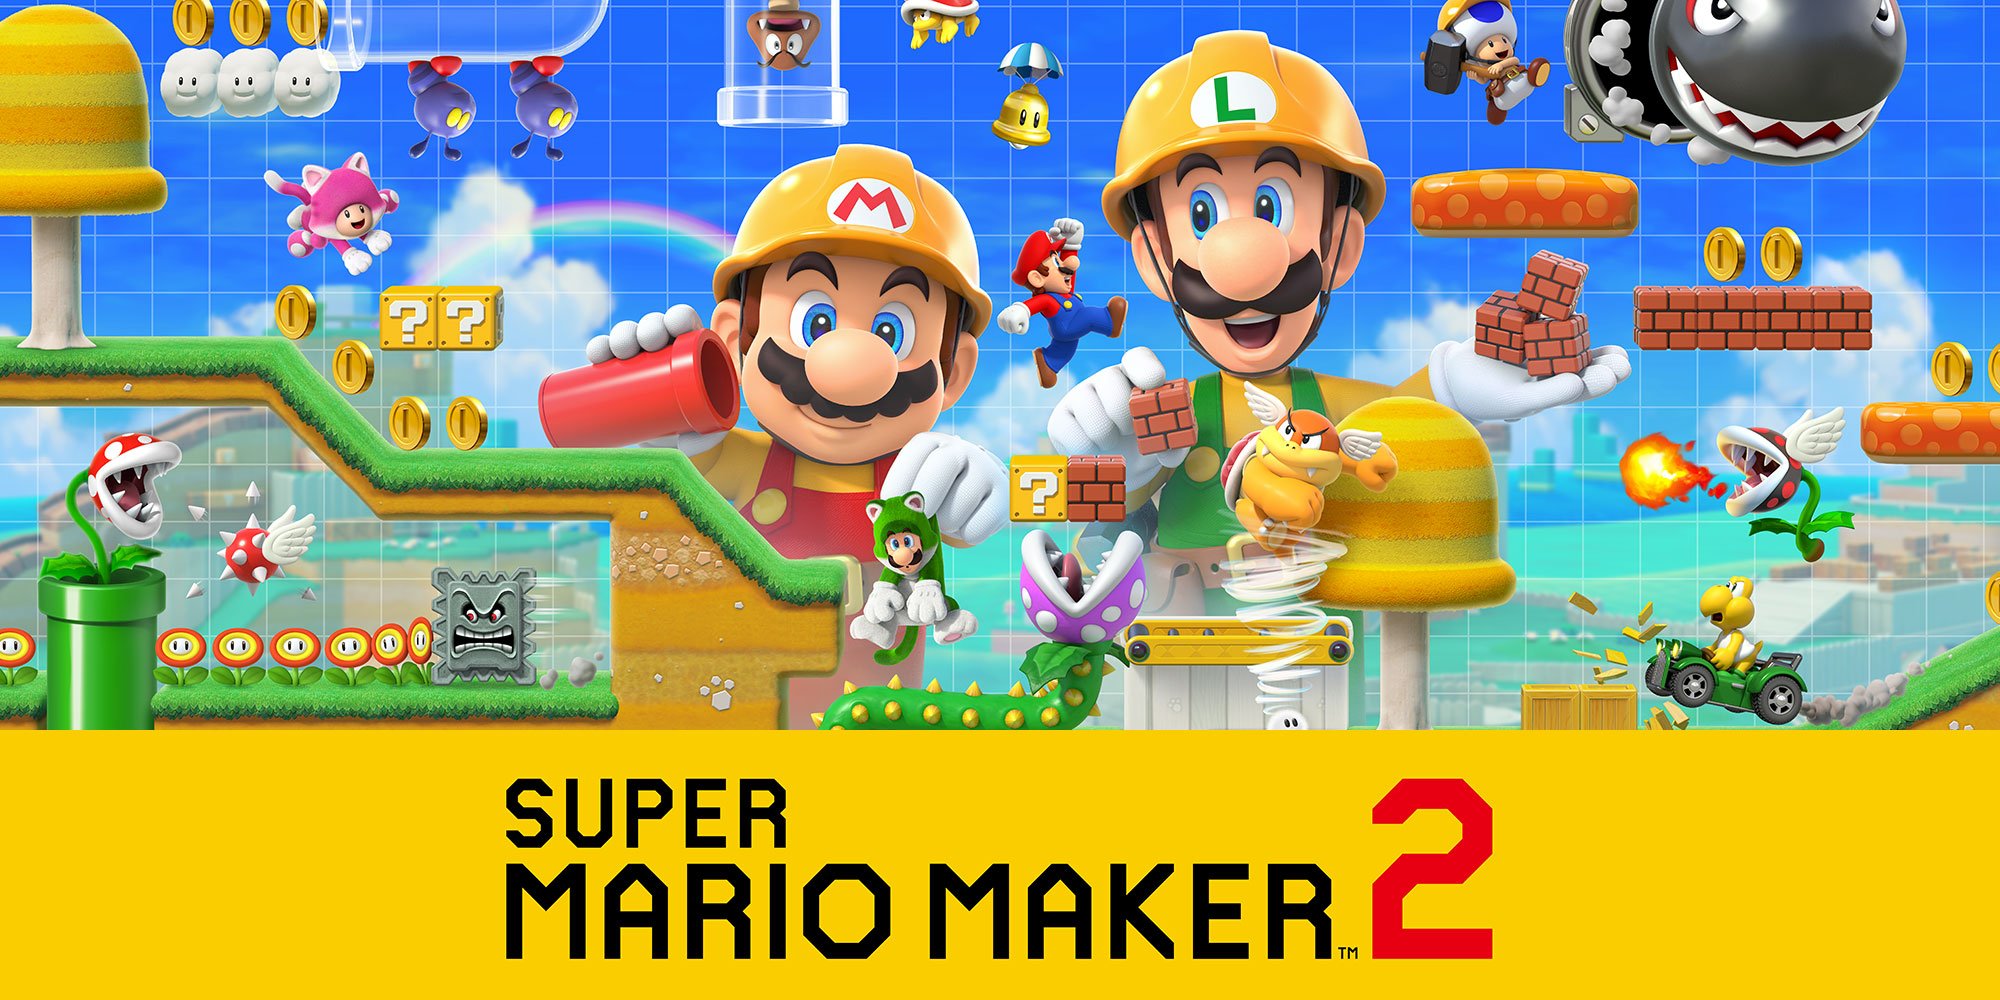 New super mario maker 2 na bgs 2019 | h2x1 nswitch supermariomaker2 1 | mobile | super apps mobile